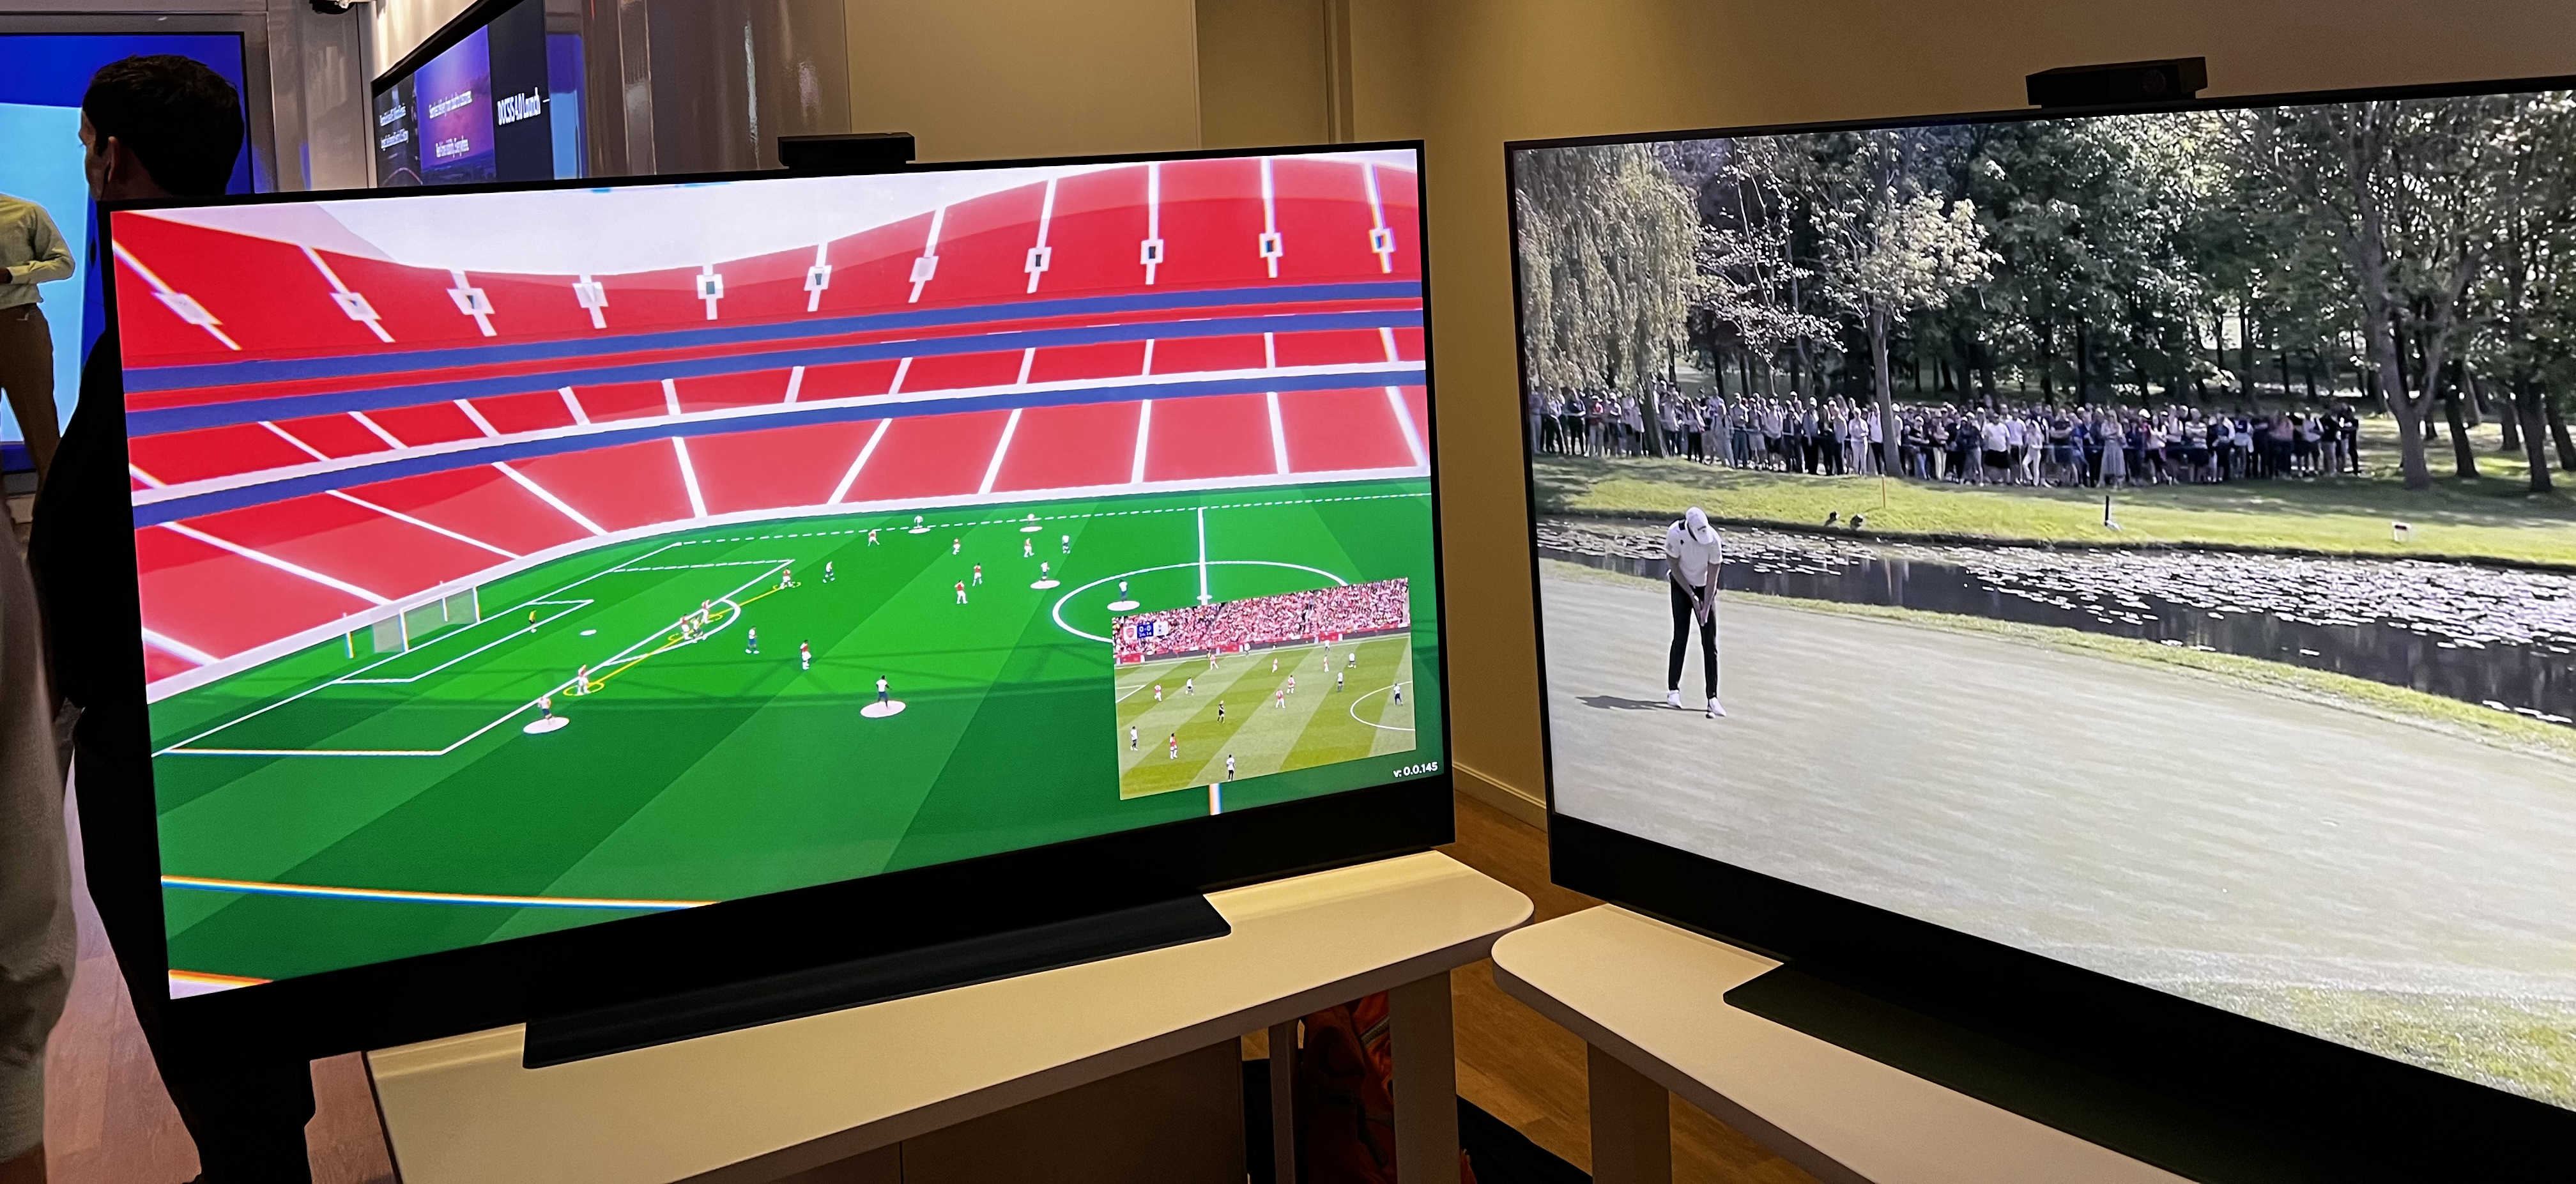 Enhanced sports viewing with digital twin at Comcast Converge